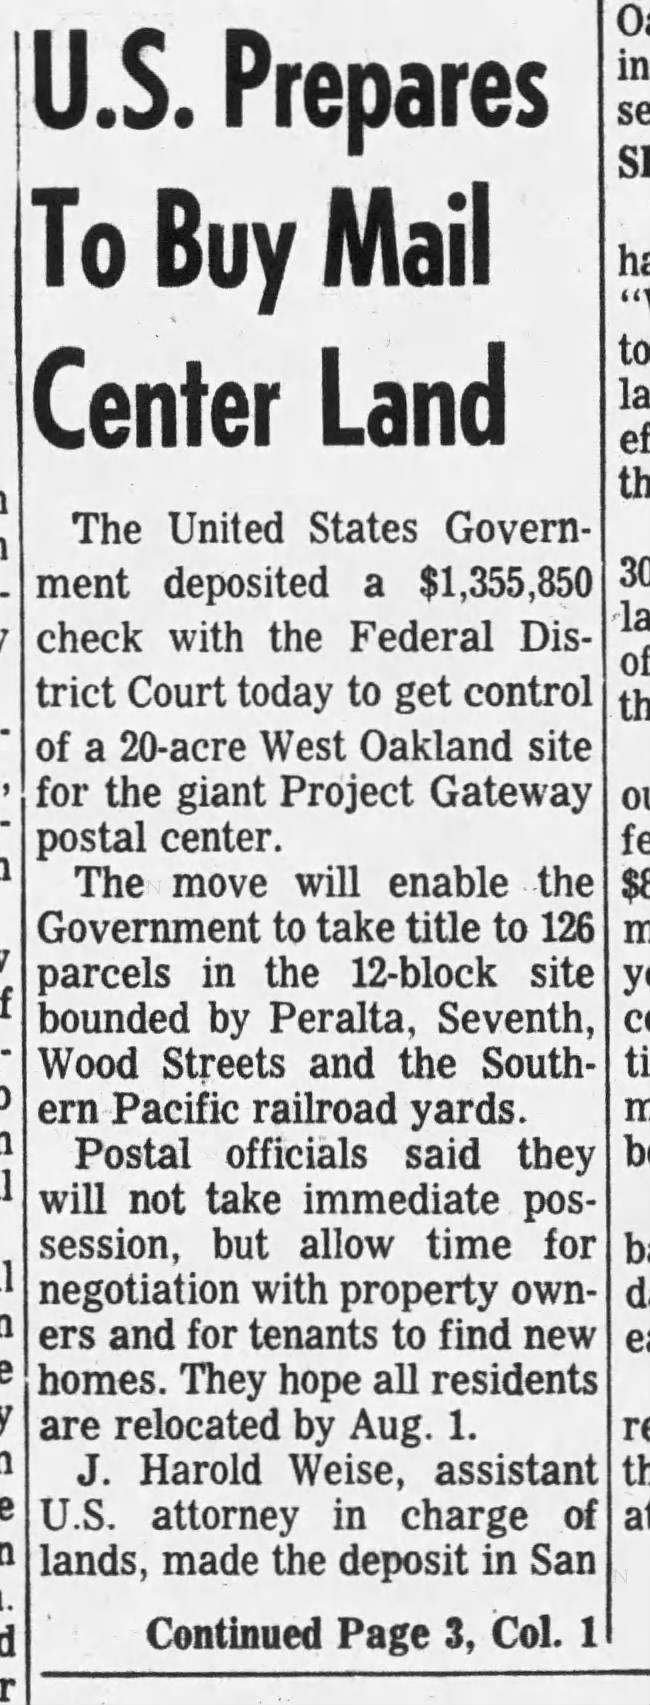 US to Buy Mail Center Land Apr 28 1960